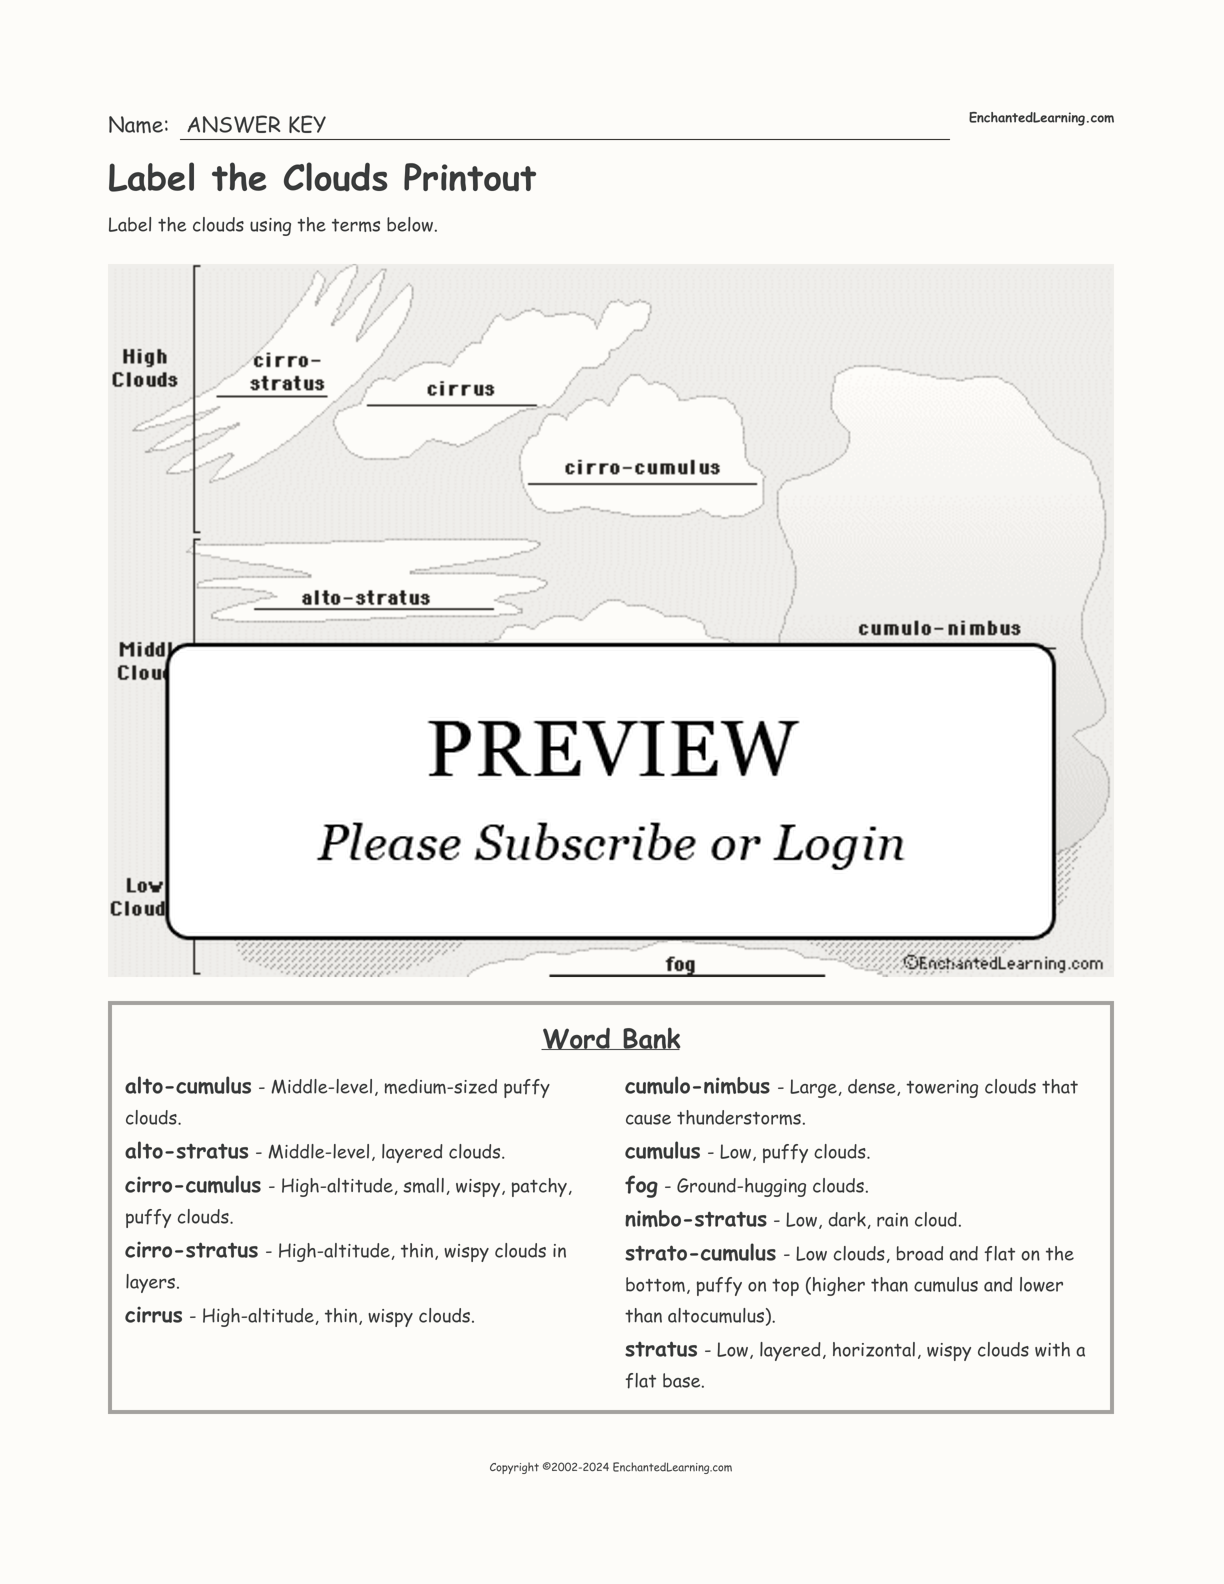 Label the Clouds Printout interactive worksheet page 2